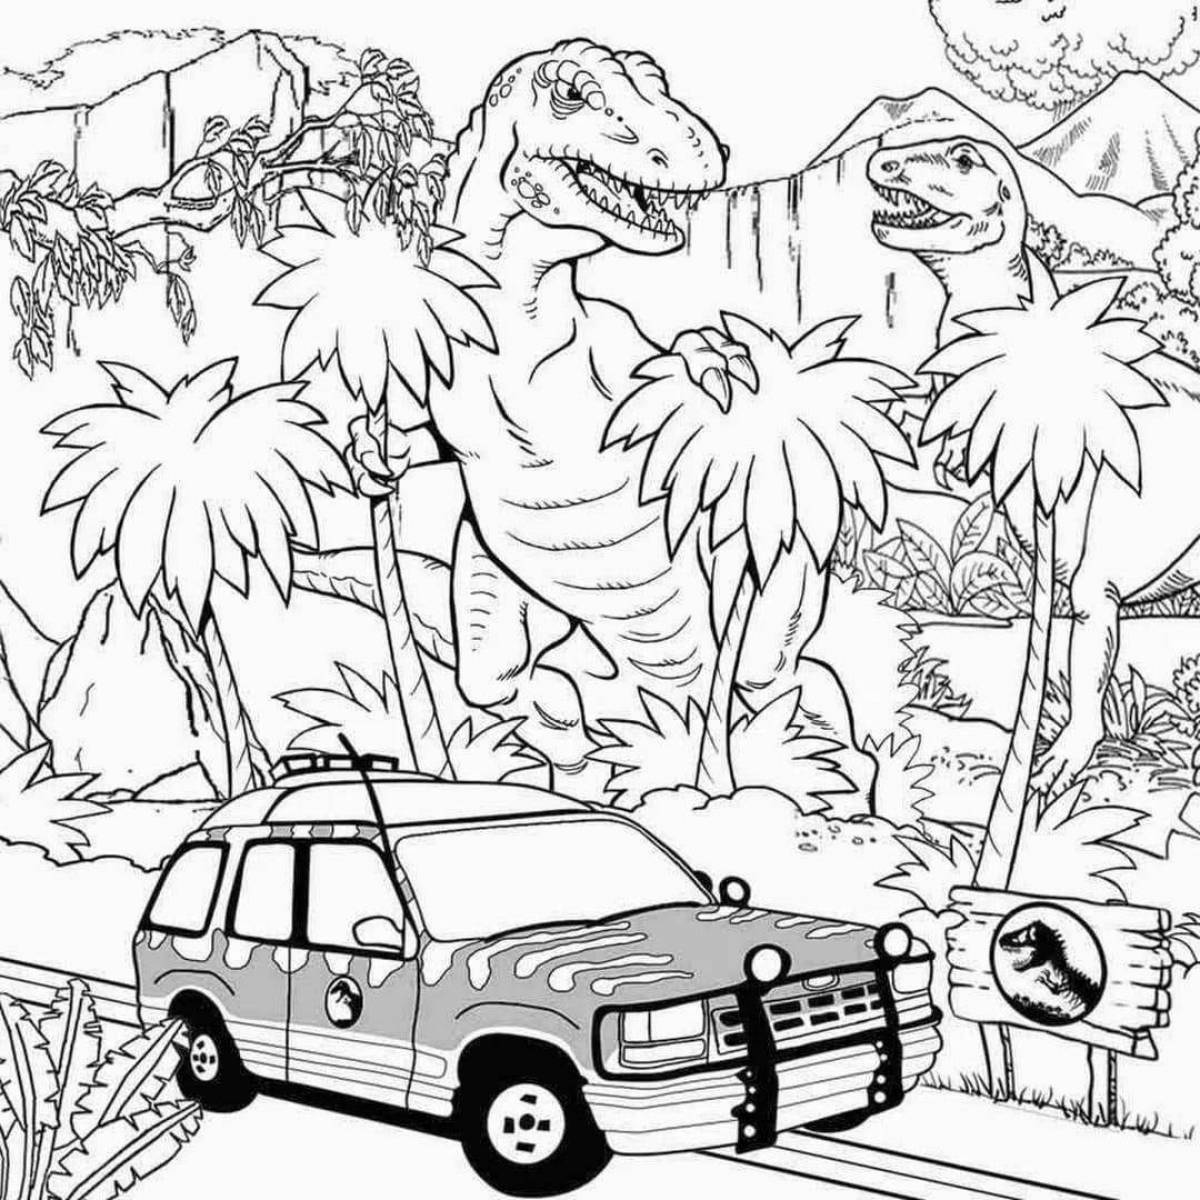 Merry Jurassic World 2 coloring book